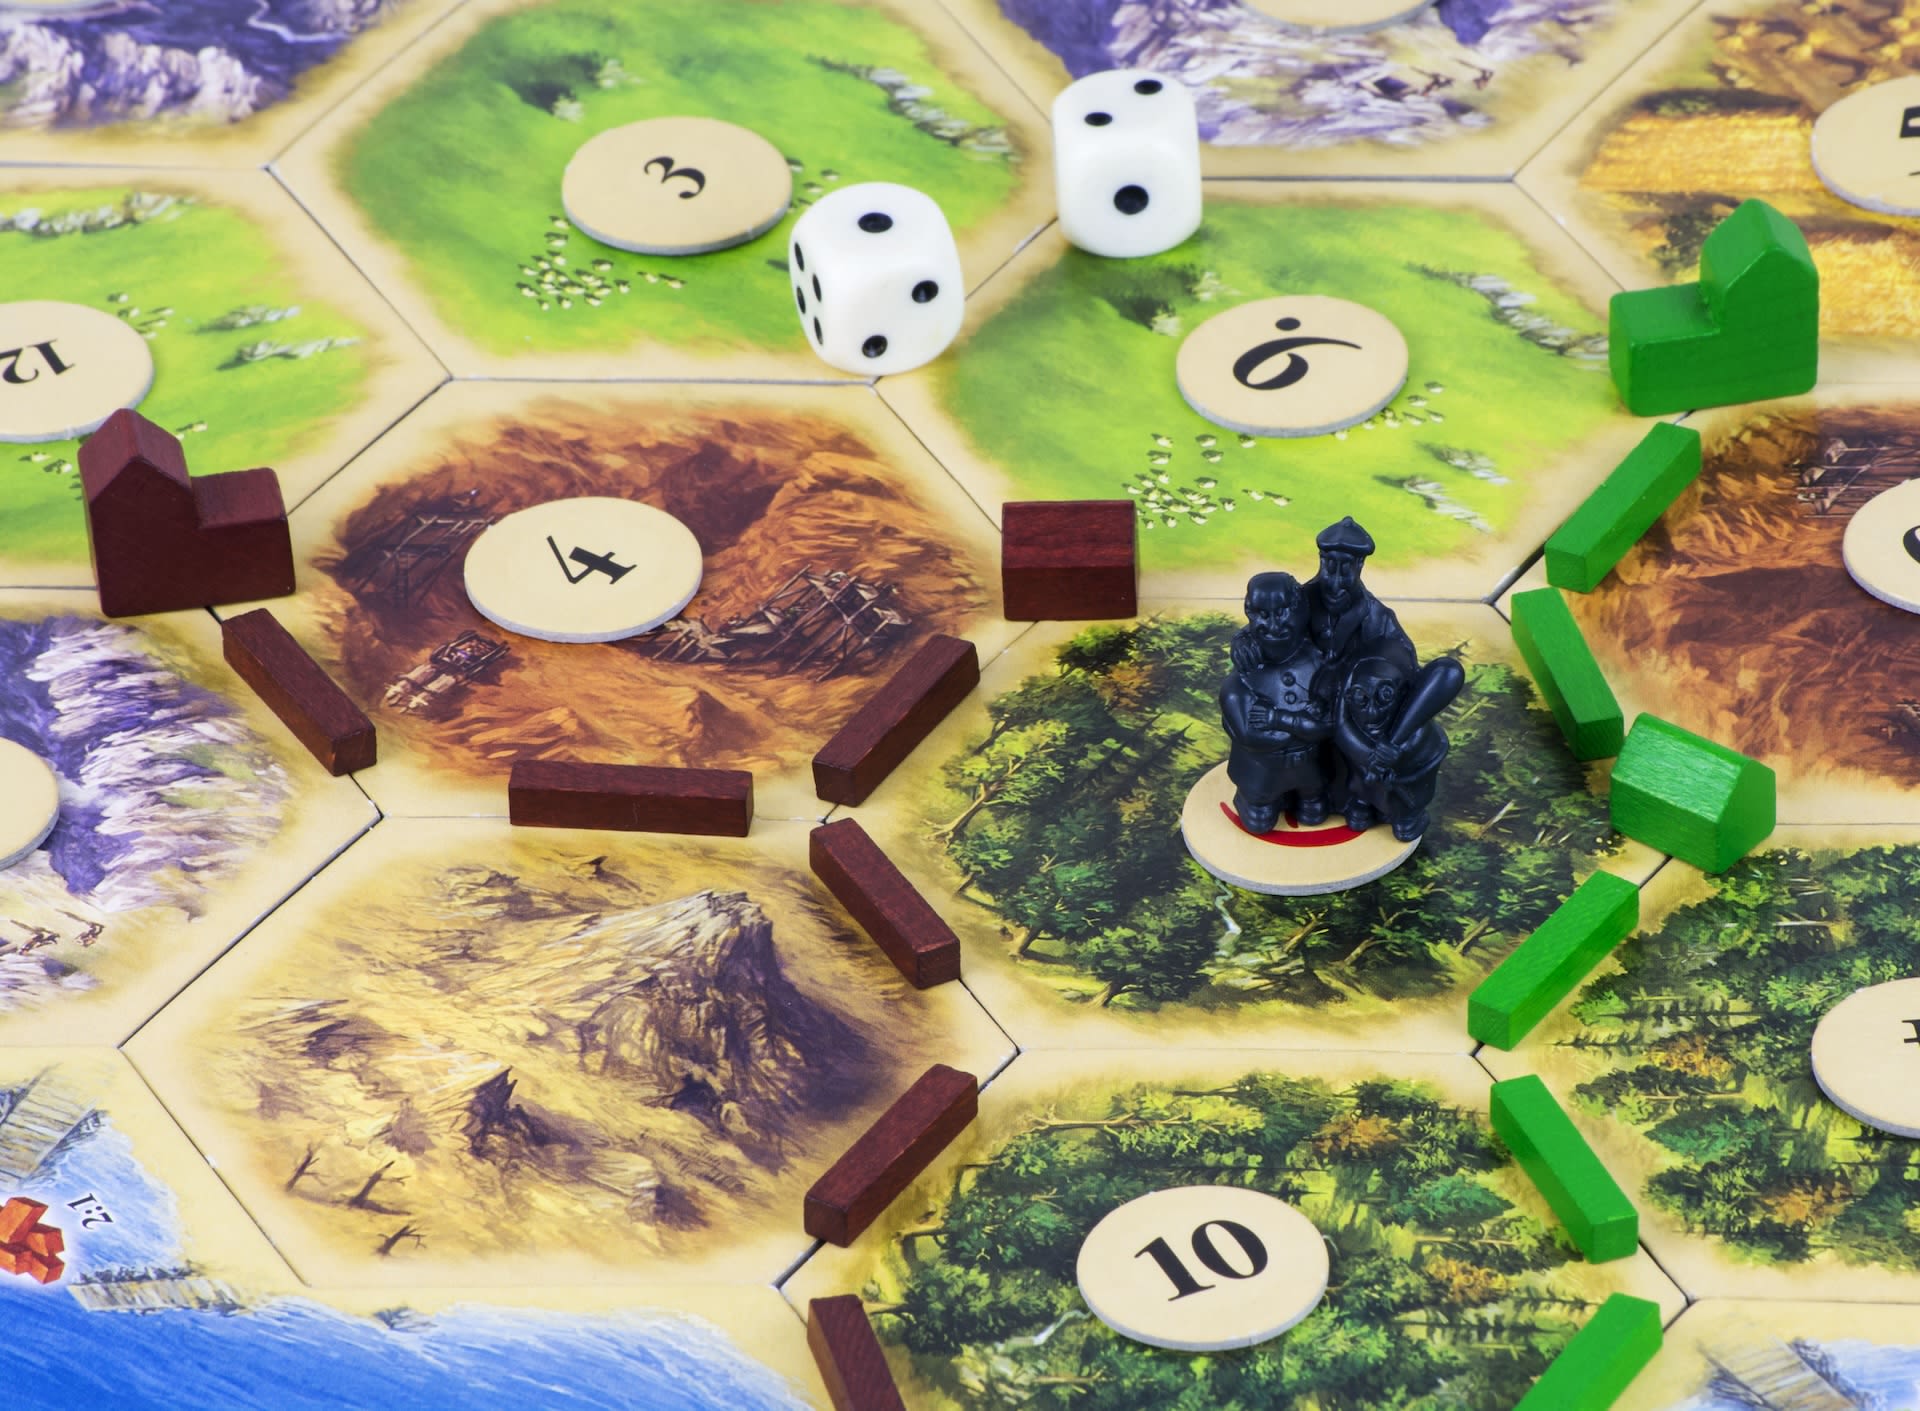 Creators of Catan release standout new edition of classic board game: 'You can later go and change the world'